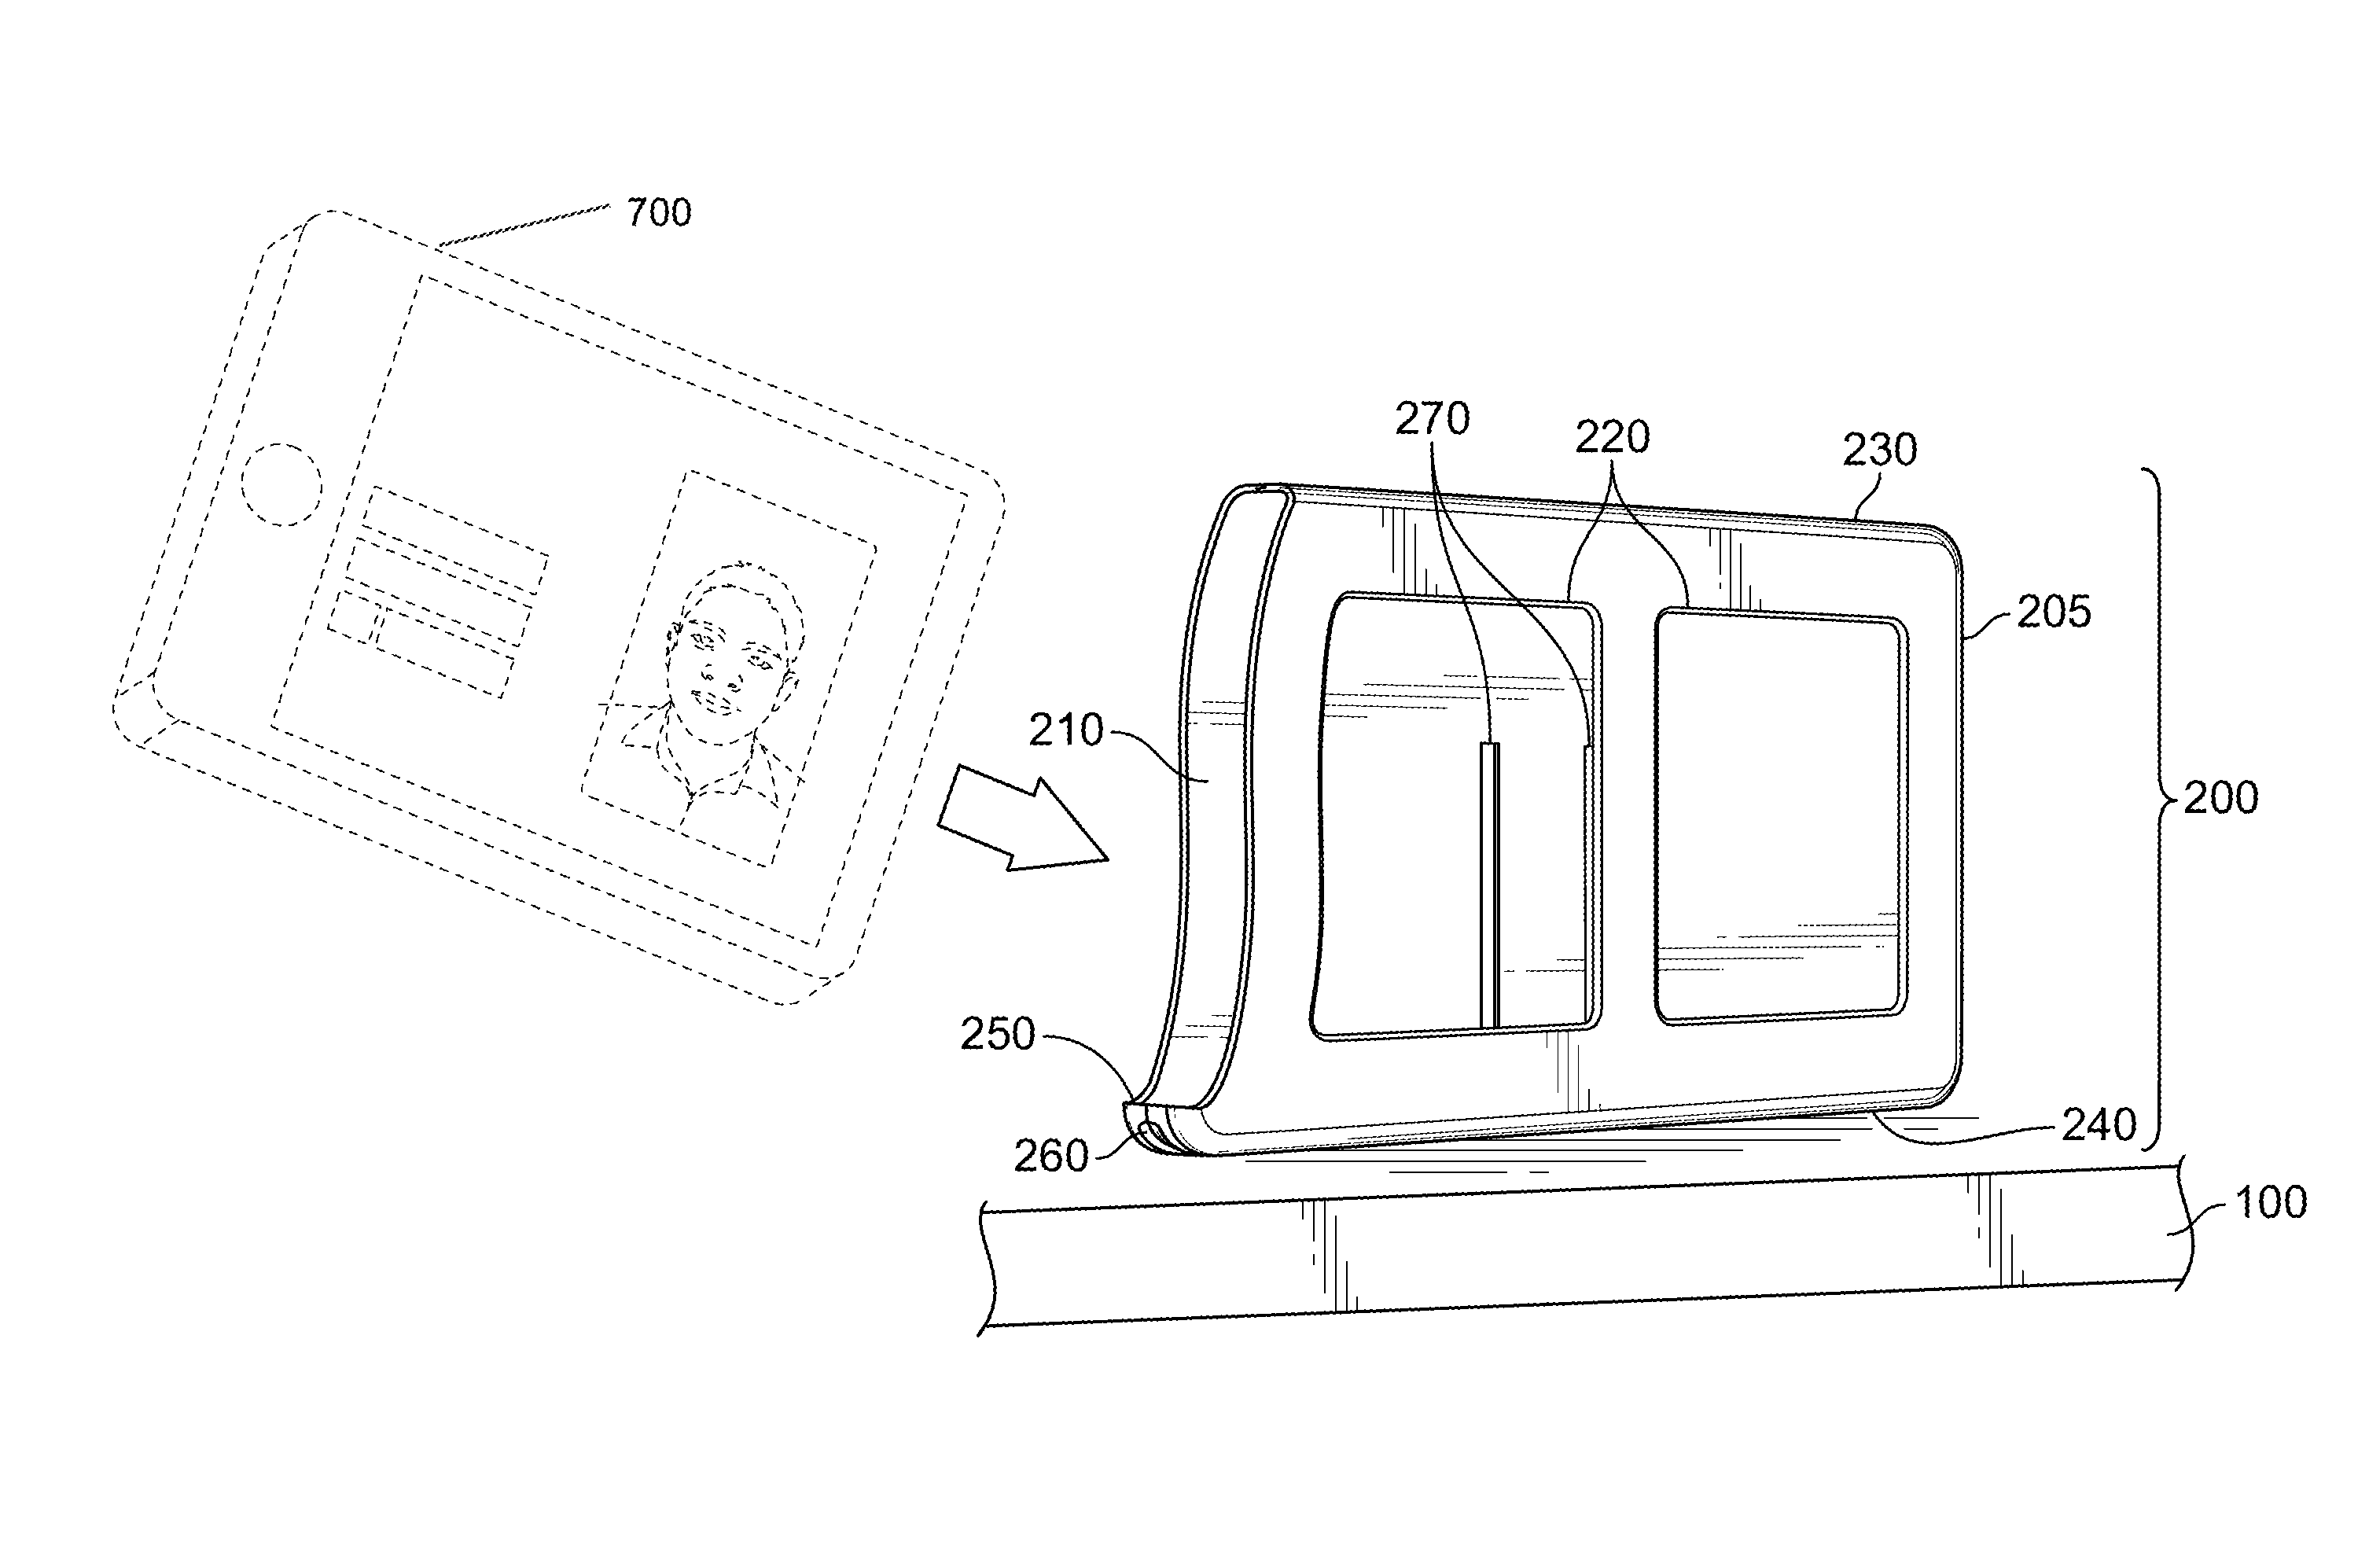 Docking station for portable electronic device